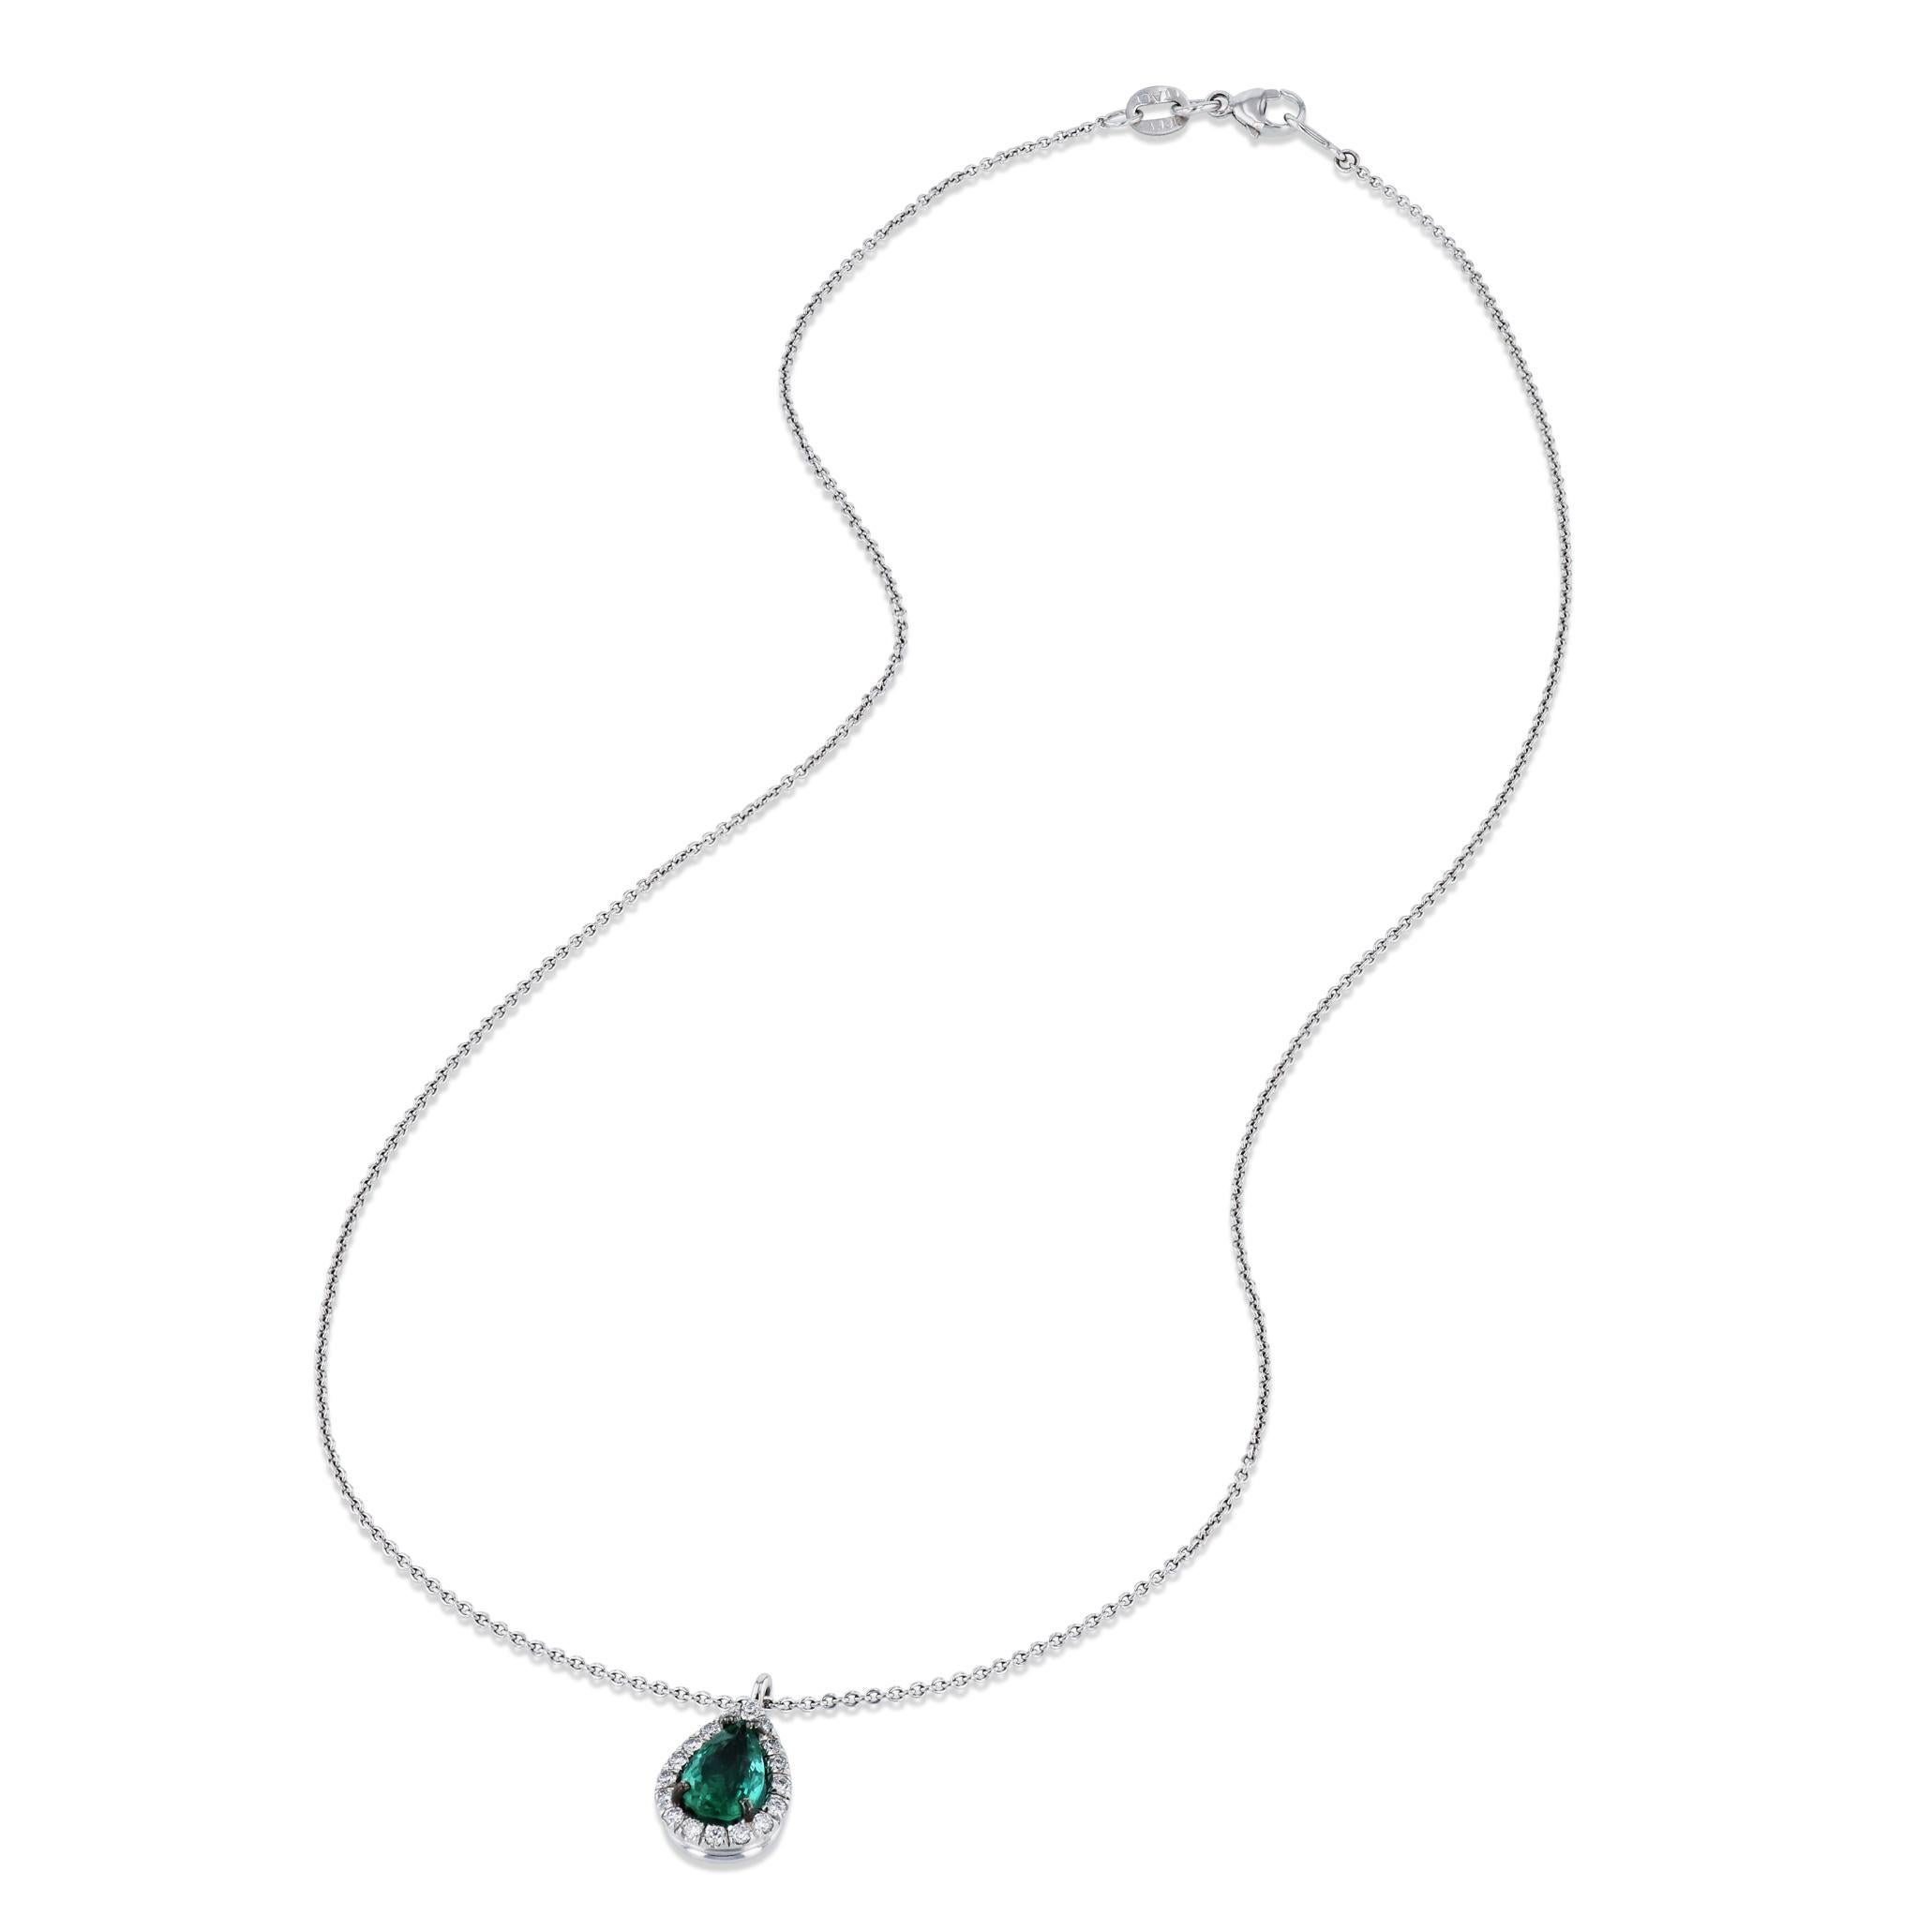 Delight in the exquisite craftsmanship of the 18K white gold diamond Colombian Emerald pendant necklace. This luxurious piece features a 0.83 carat pear-shaped emerald, with 17 sparkling diamonds. The delicate cable link chain is a perfect